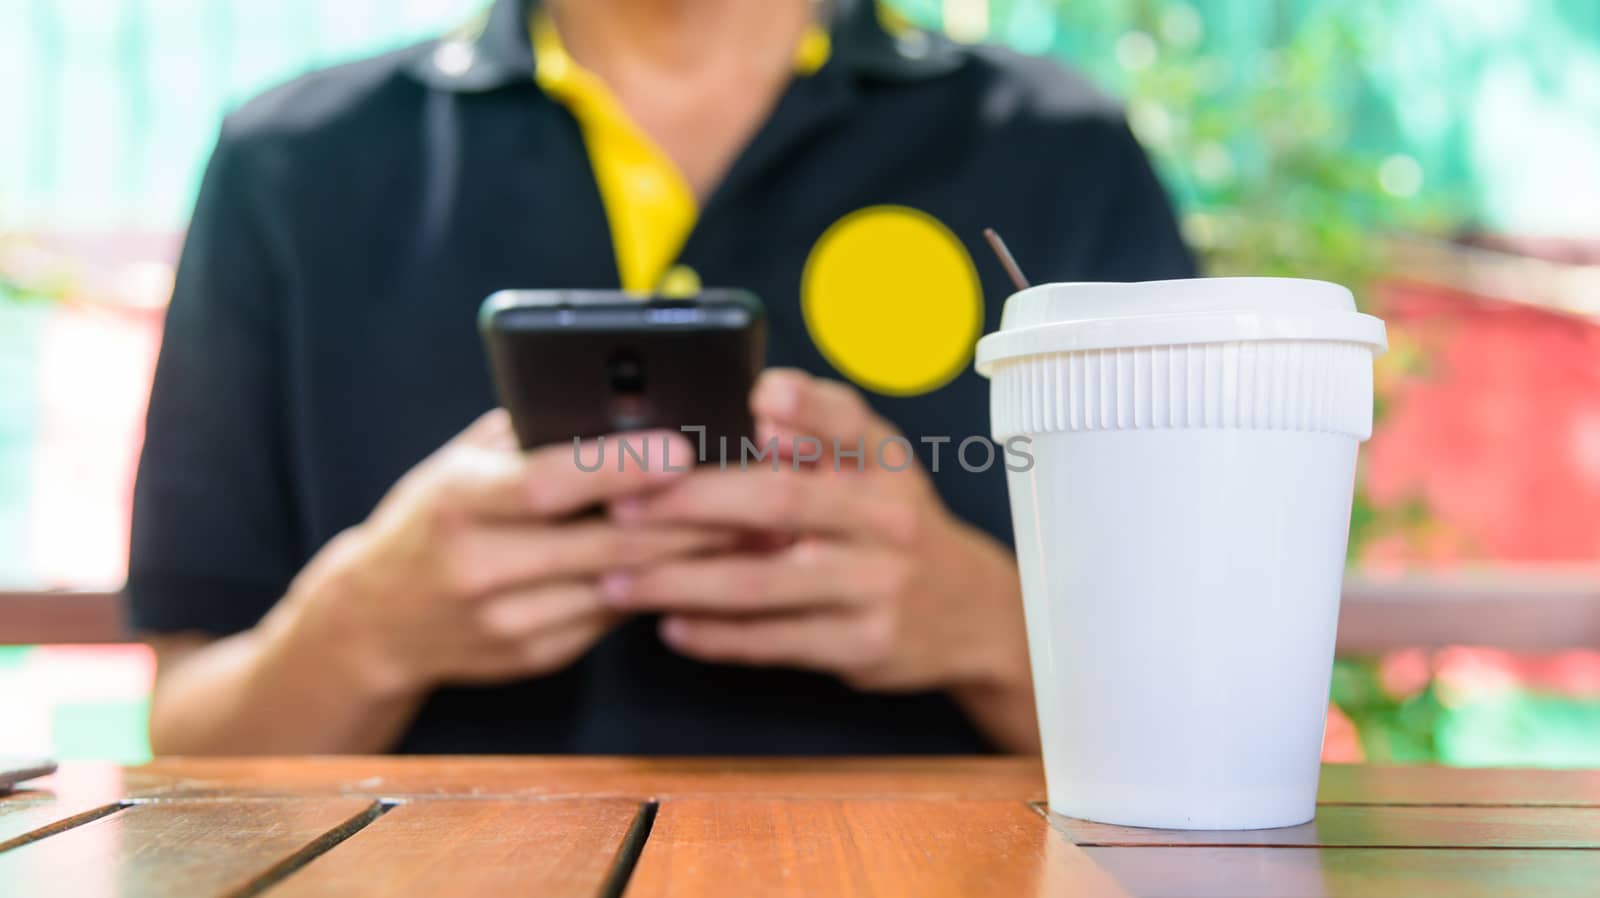 The man use smartphone in coffee shop by rukawajung